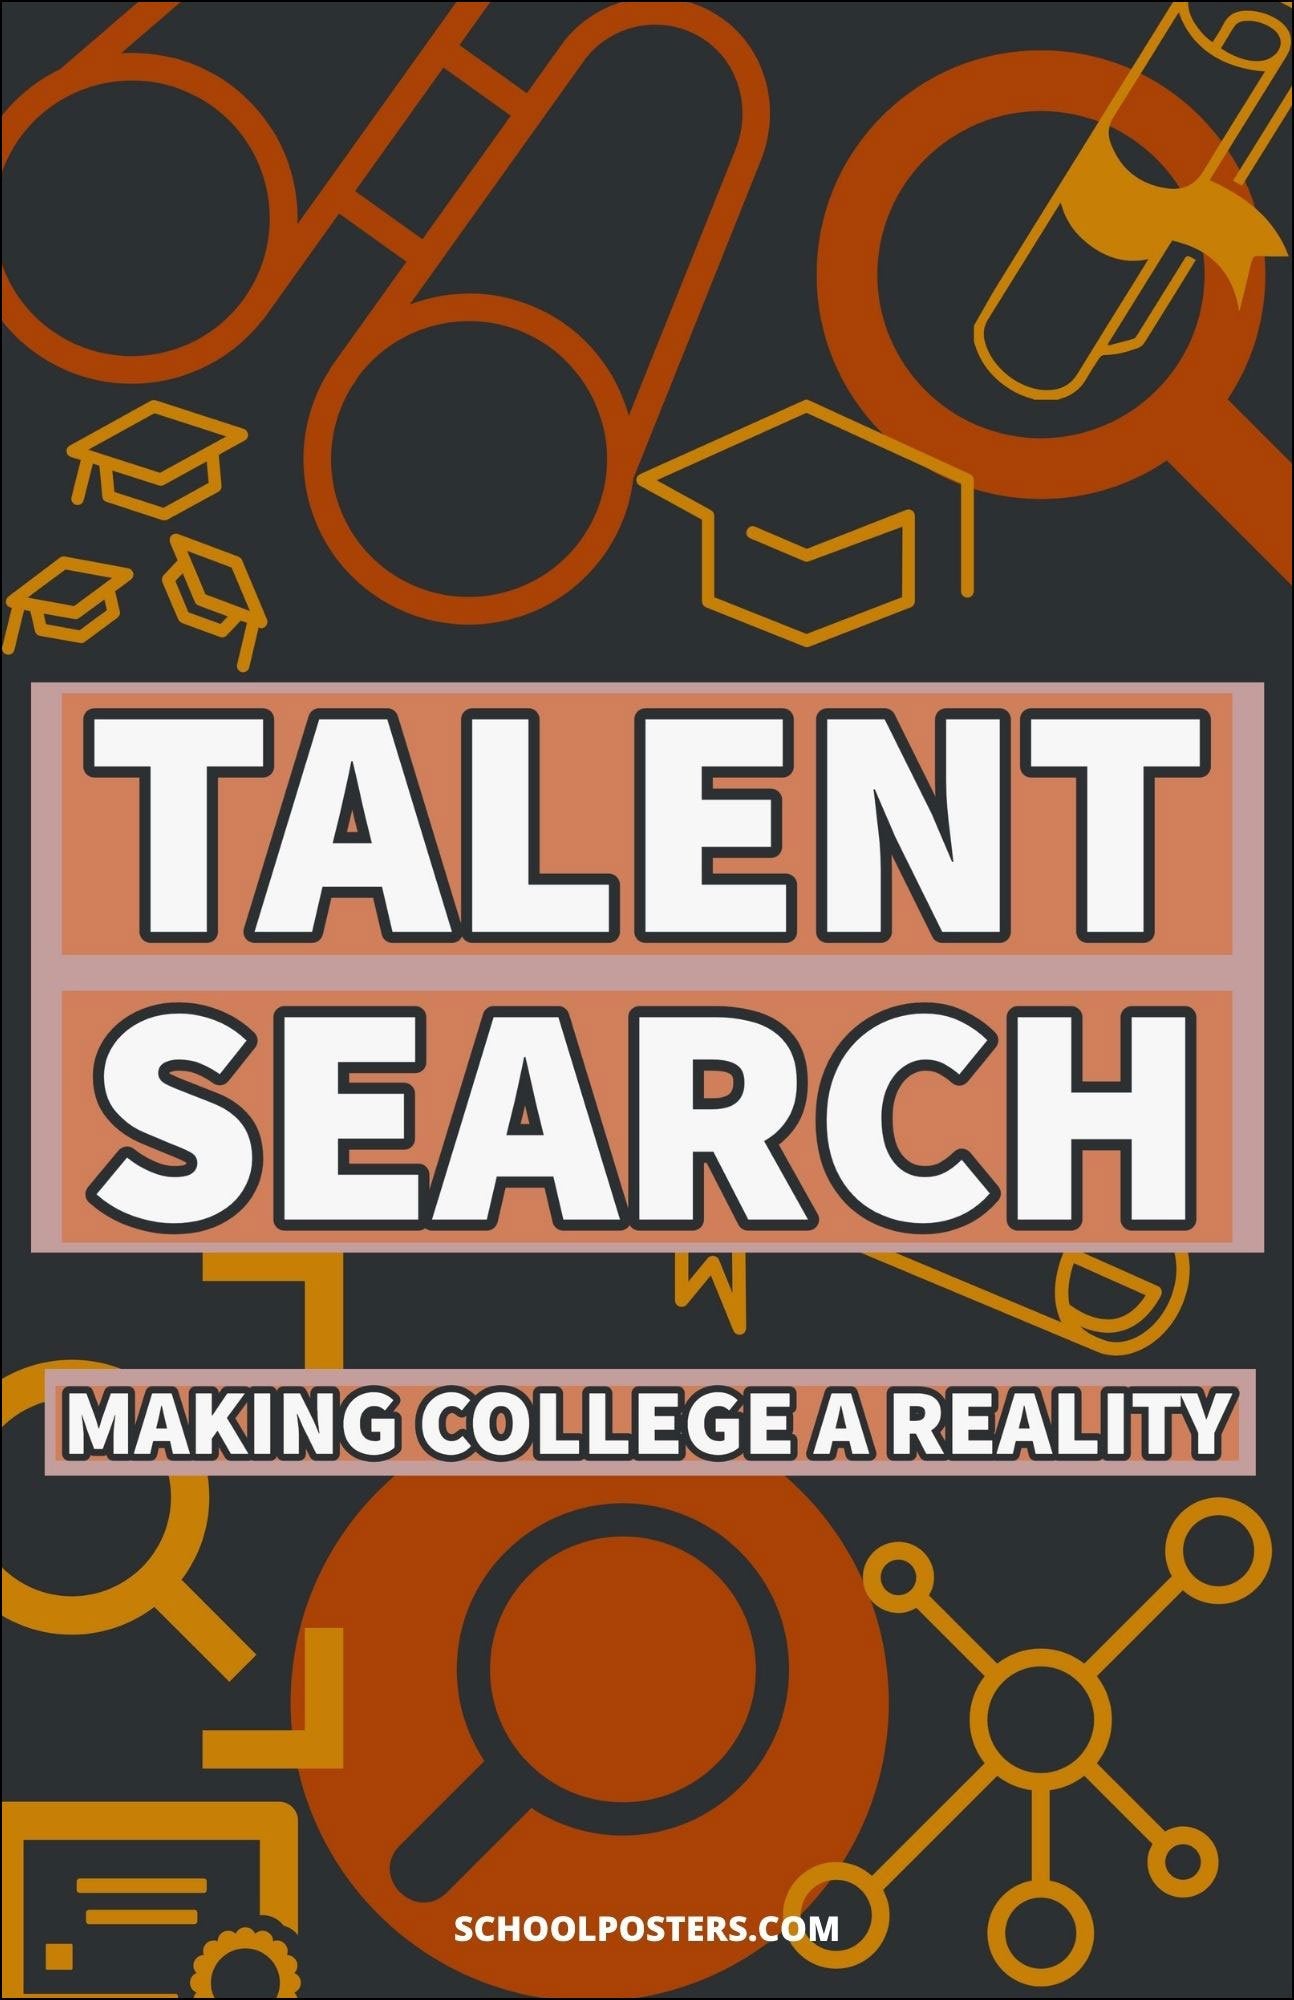 TRIO Talent Search College Reality Poster